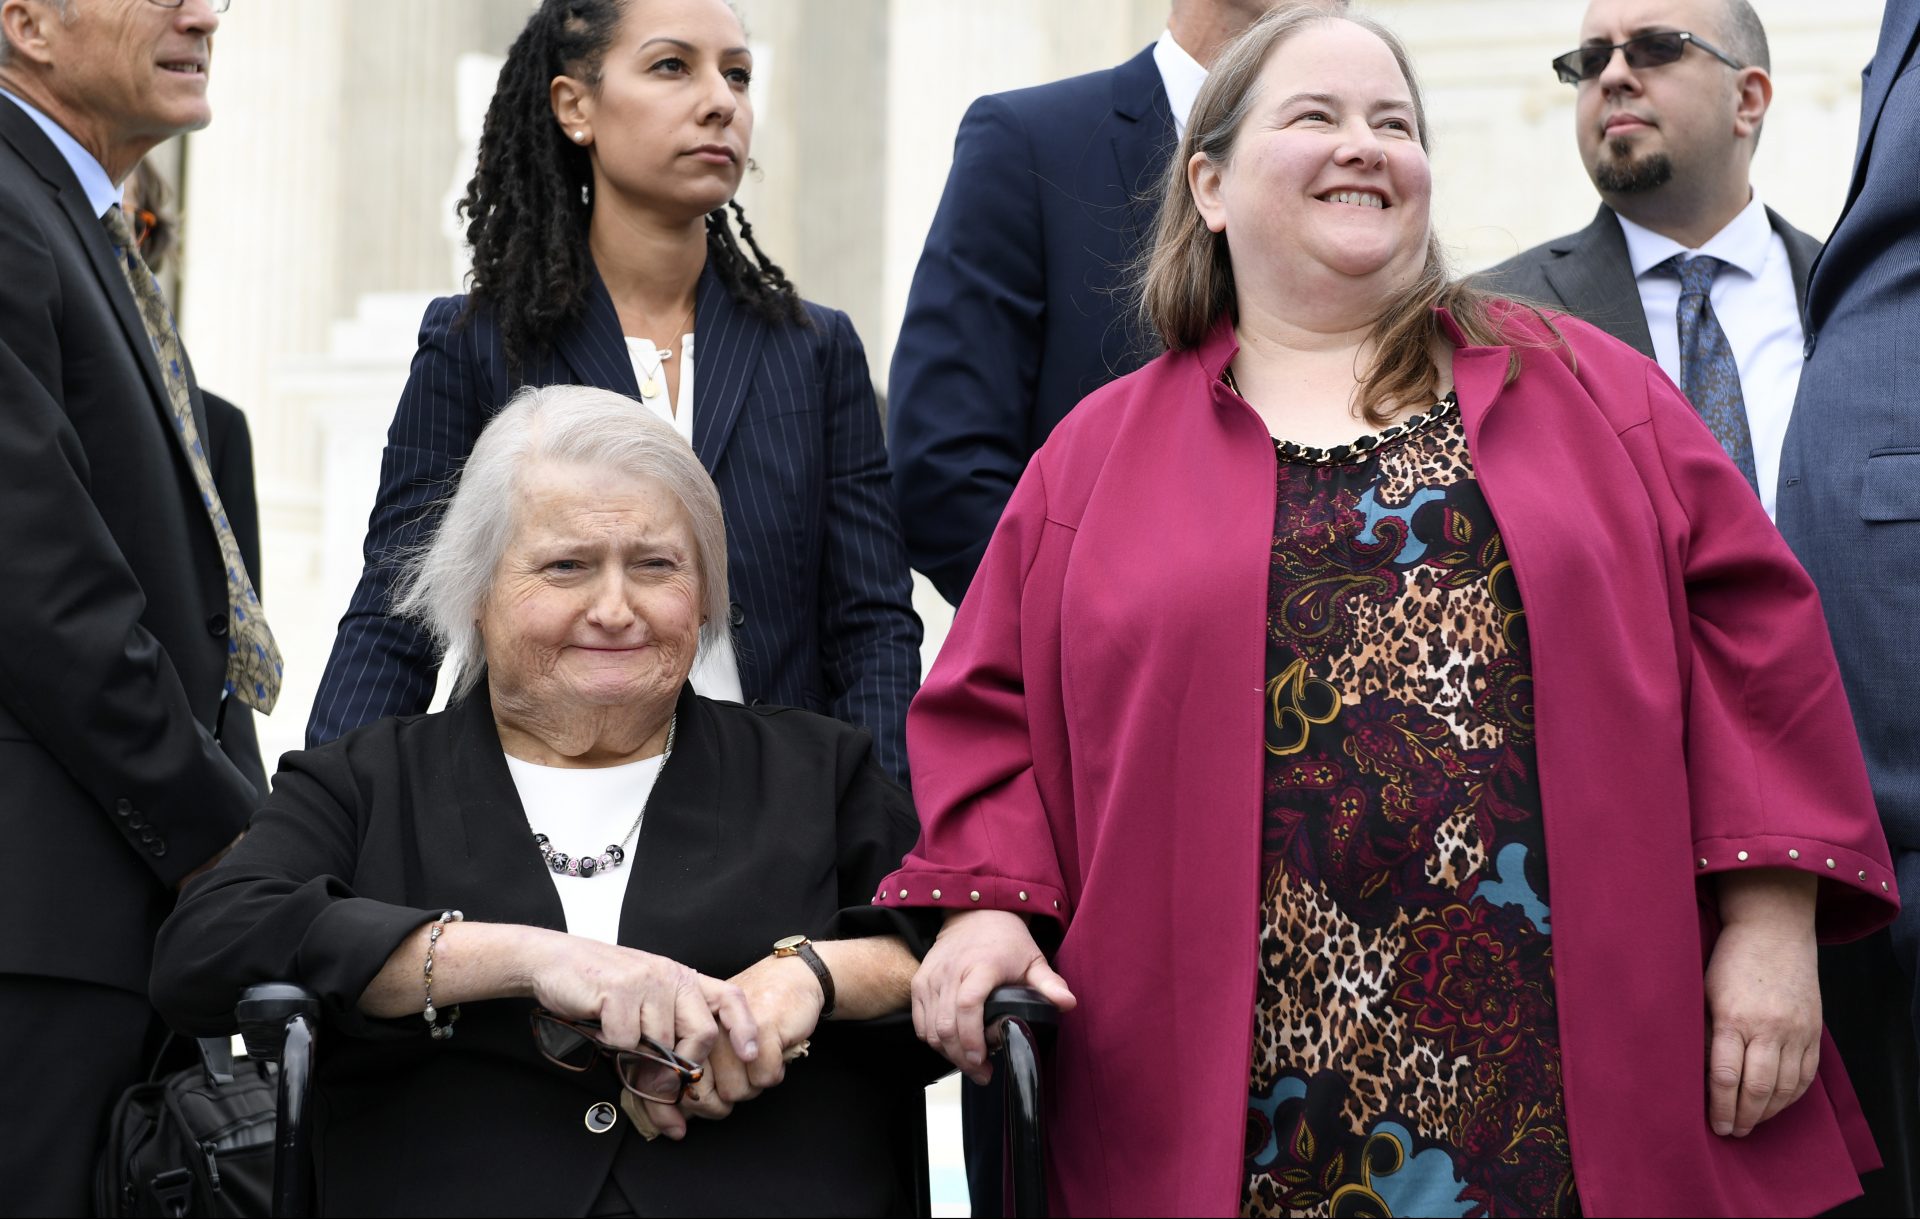 Aimee Stephens, seated, and her wife Donna Stephens, in pink, listen during a news conference outside the Supreme Court in Washington, Tuesday, Oct. 8, 2019. Aimee Stephens lost her job when she told Thomas Rost, owner of the Detroit-area R.G. and G.R. Harris Funeral Homes, that she had struggled with gender identity issues almost her whole life. The Supreme Court heard oral arguments earlier in the day on her case.